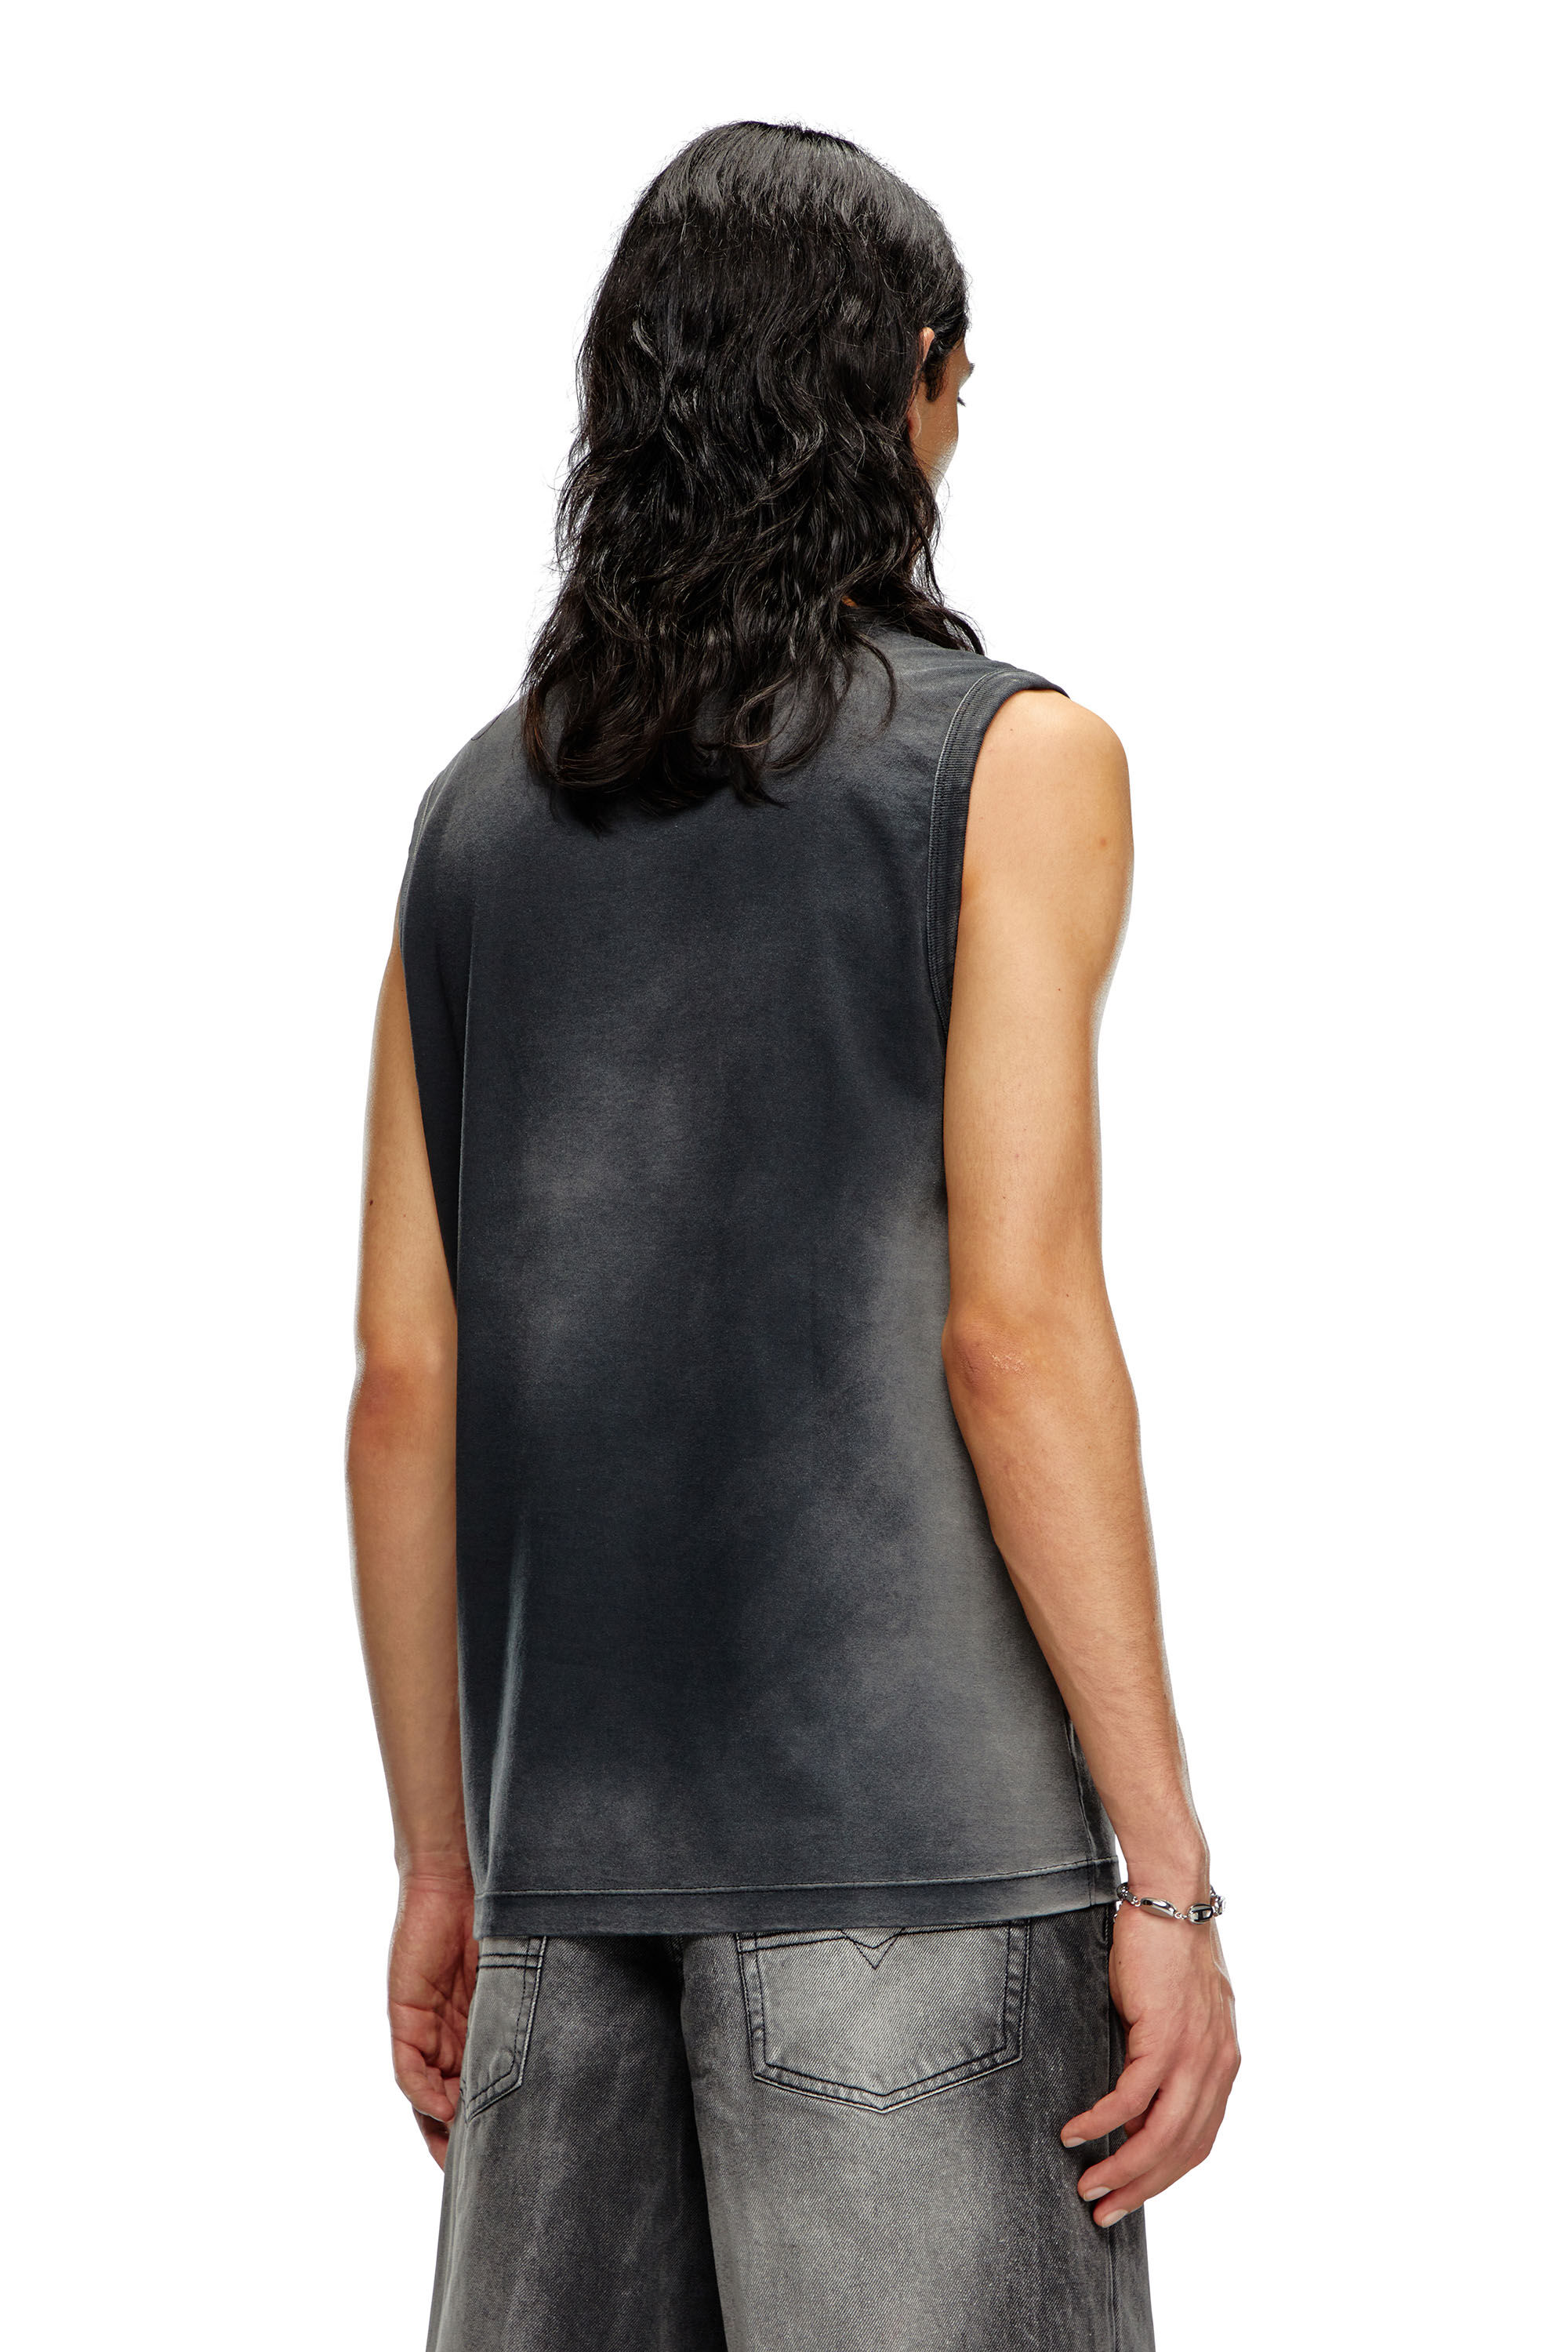 T-BRICO Faded tank top with puffy Oval D｜ブラック｜メンズ｜DIESEL